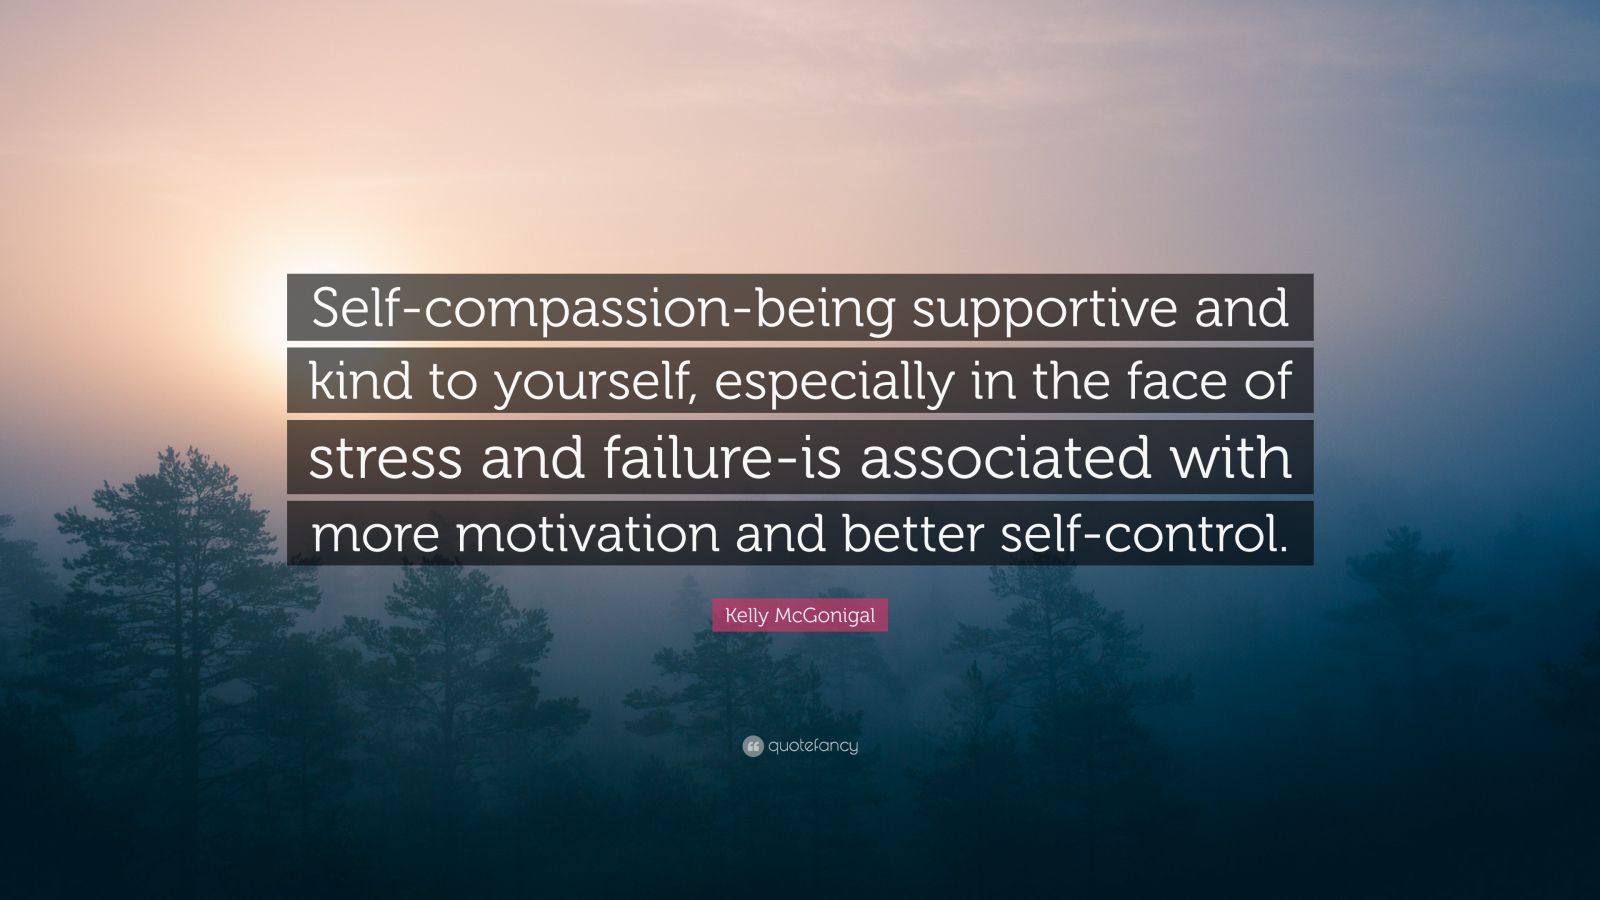 Kelly McGonigal Quote supportive